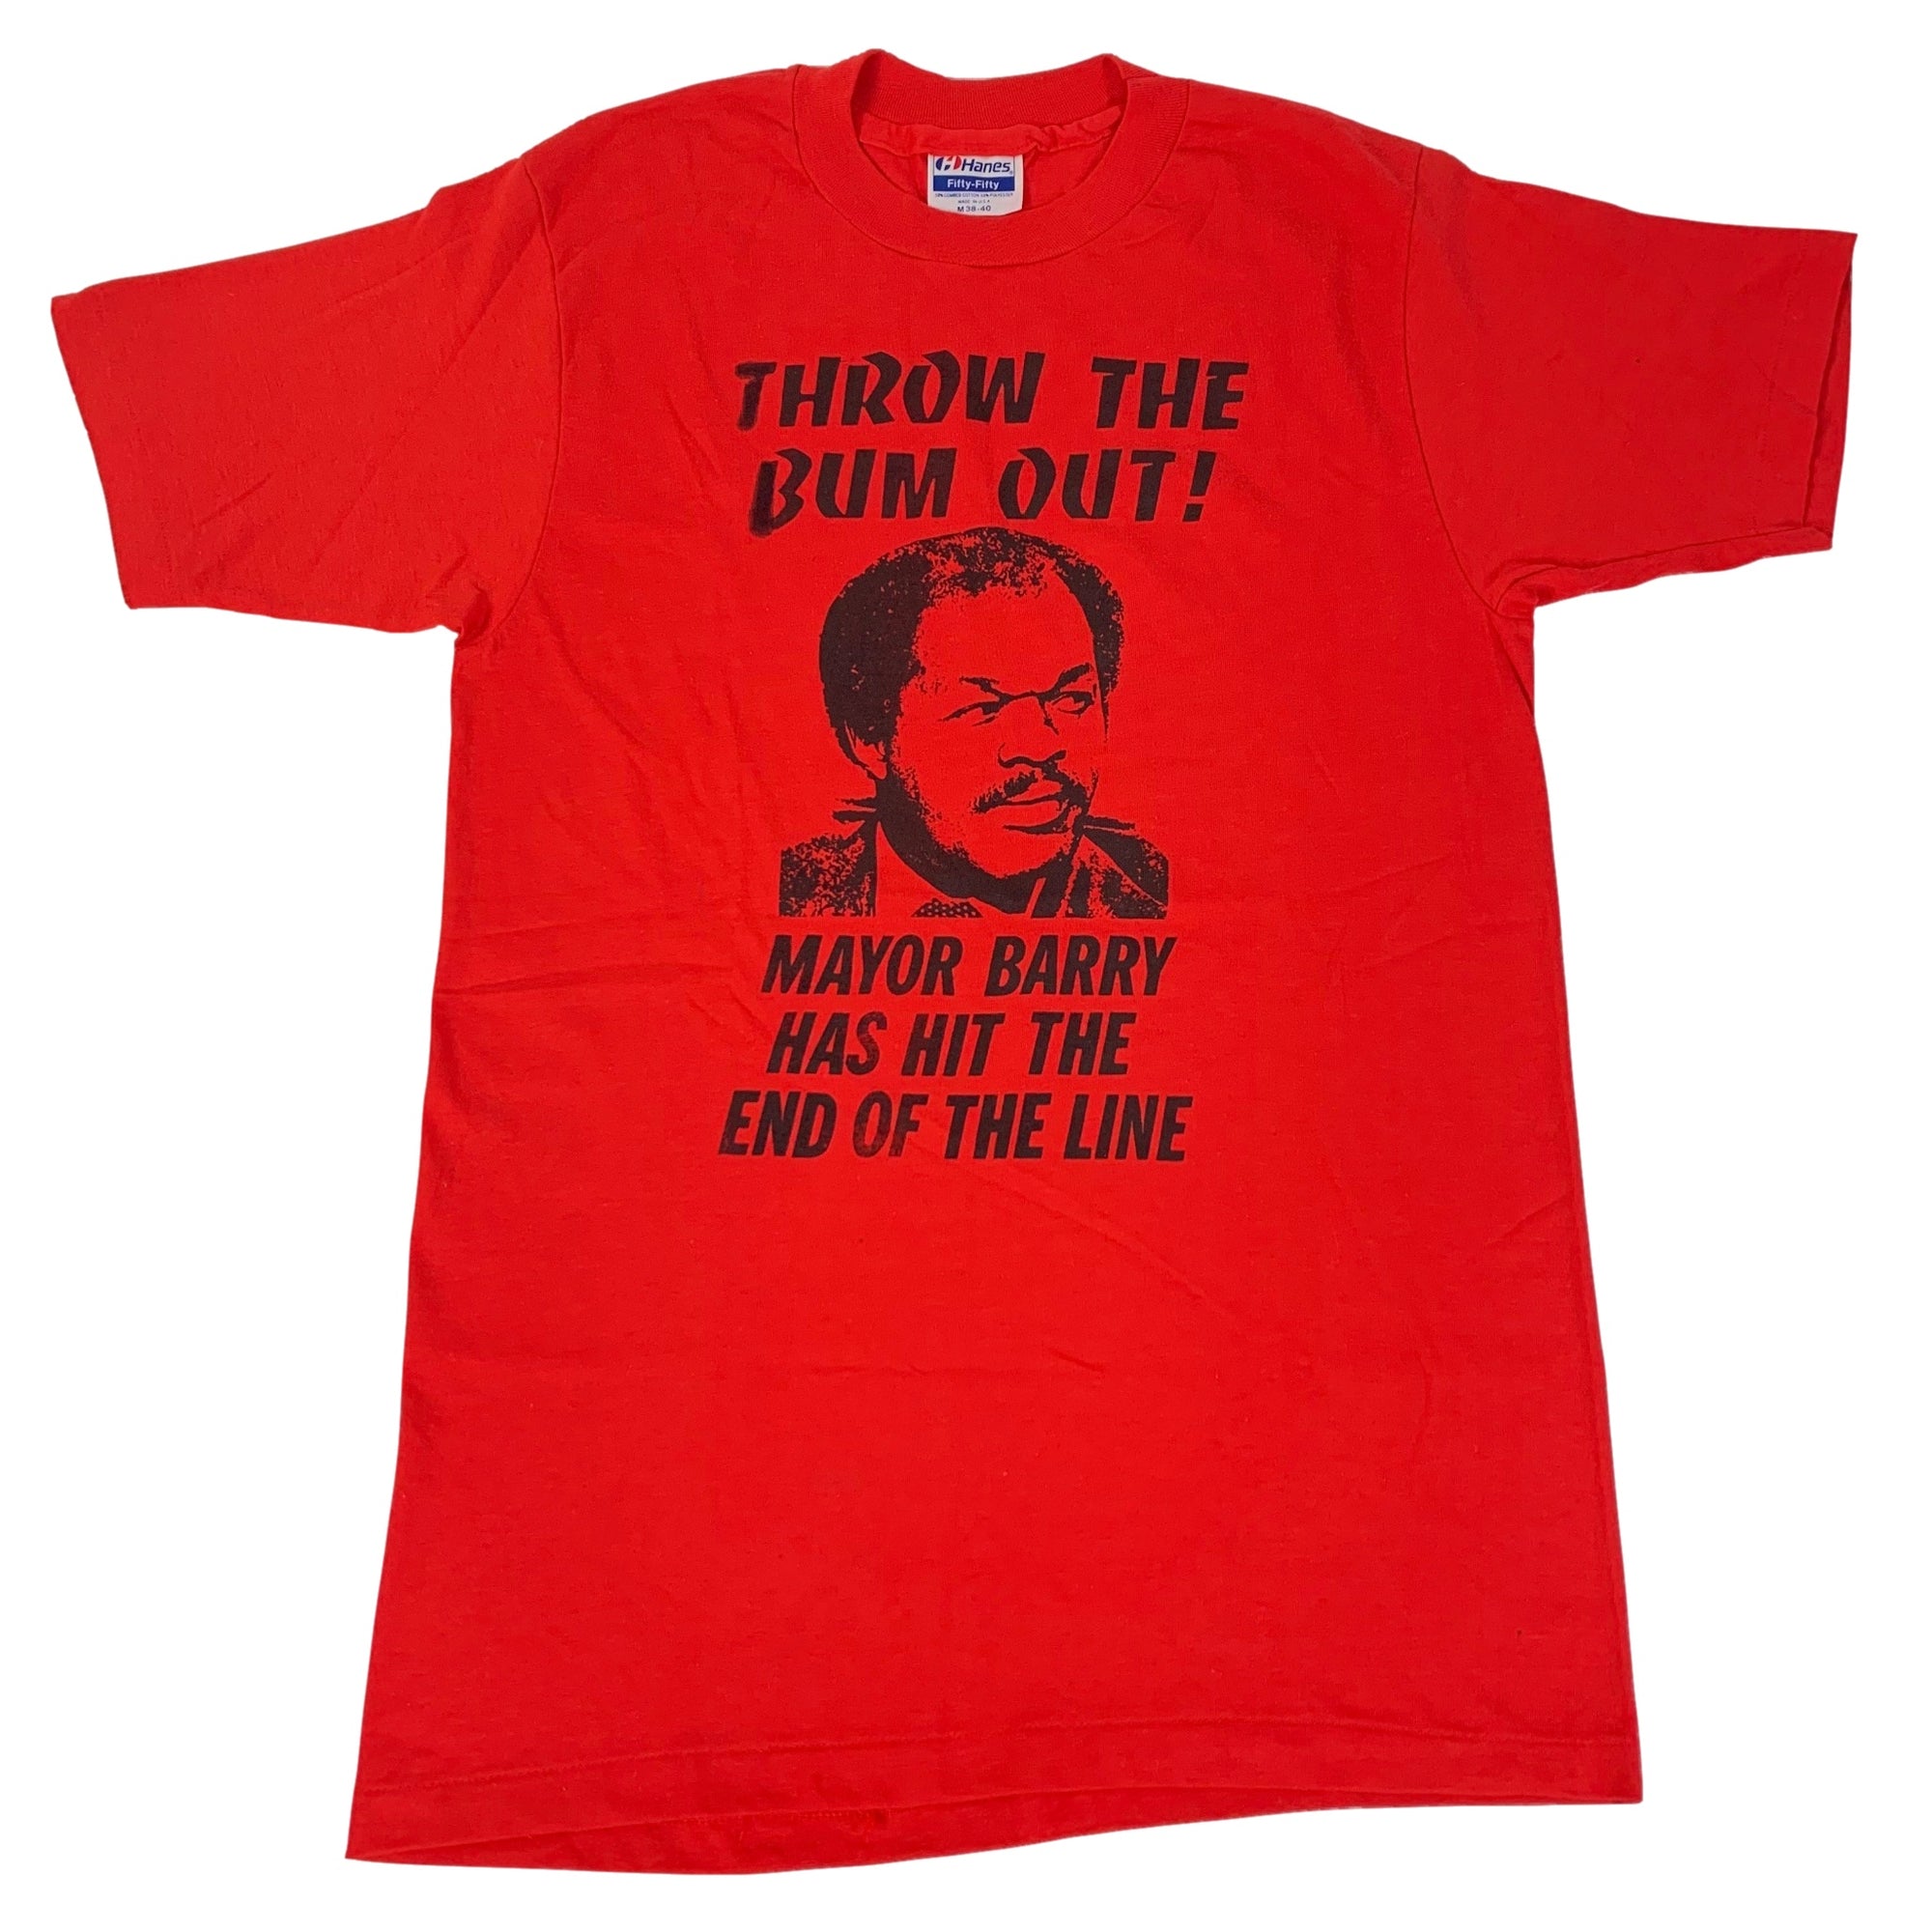 Vintage Marion Barry "Throw The Bum Out!" T-Shirt - jointcustodydc